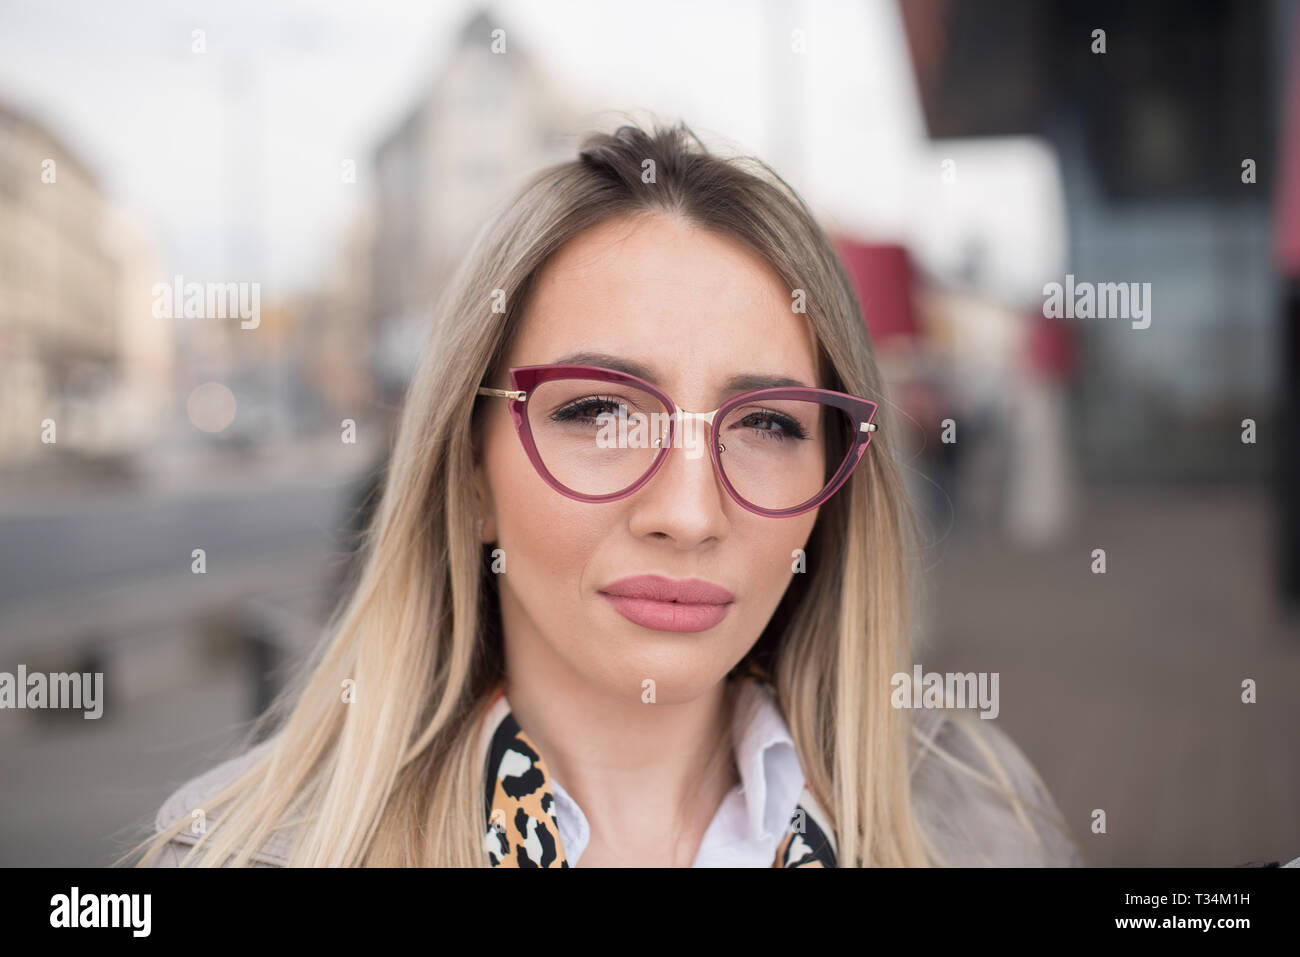 Portrait of a woman standing in the street wearing spectacles, Bosnia and Herzegovina Stock Photo